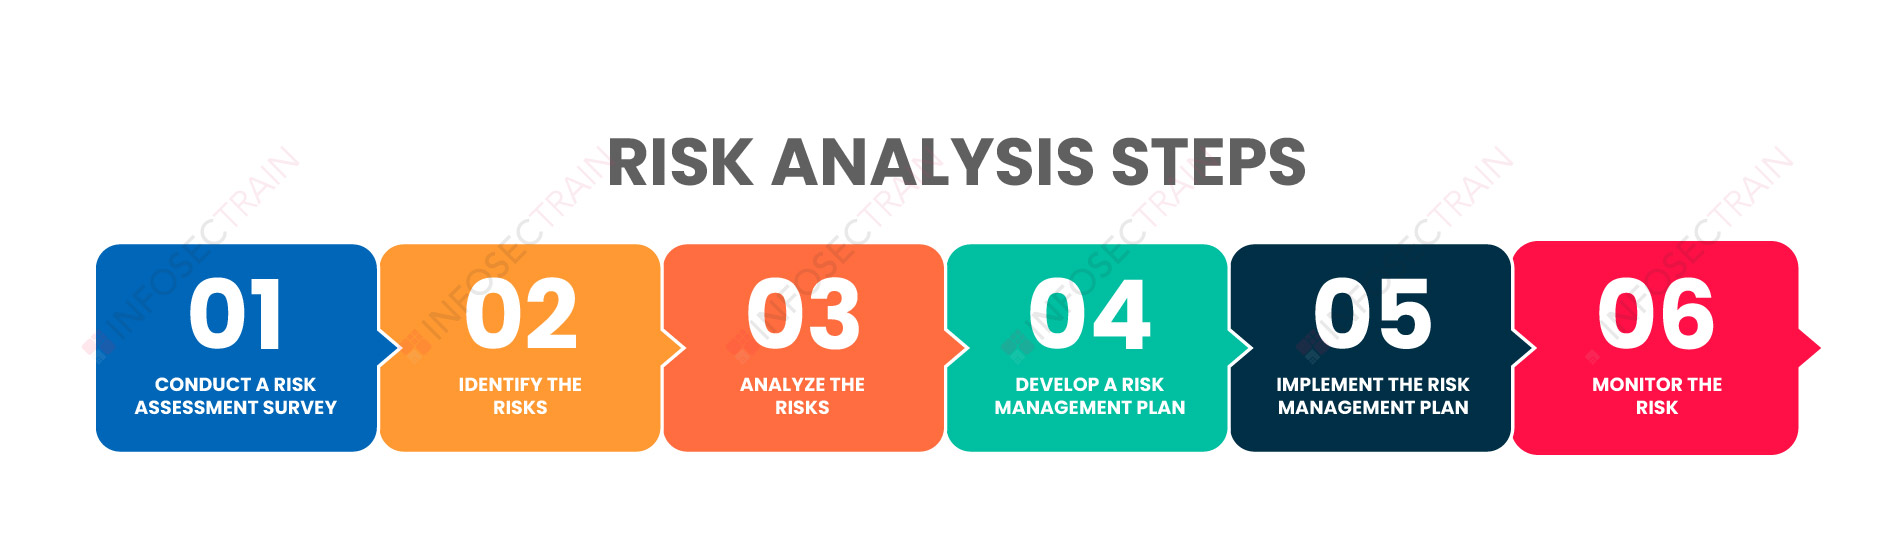 Steps in the Risk Analysis Process